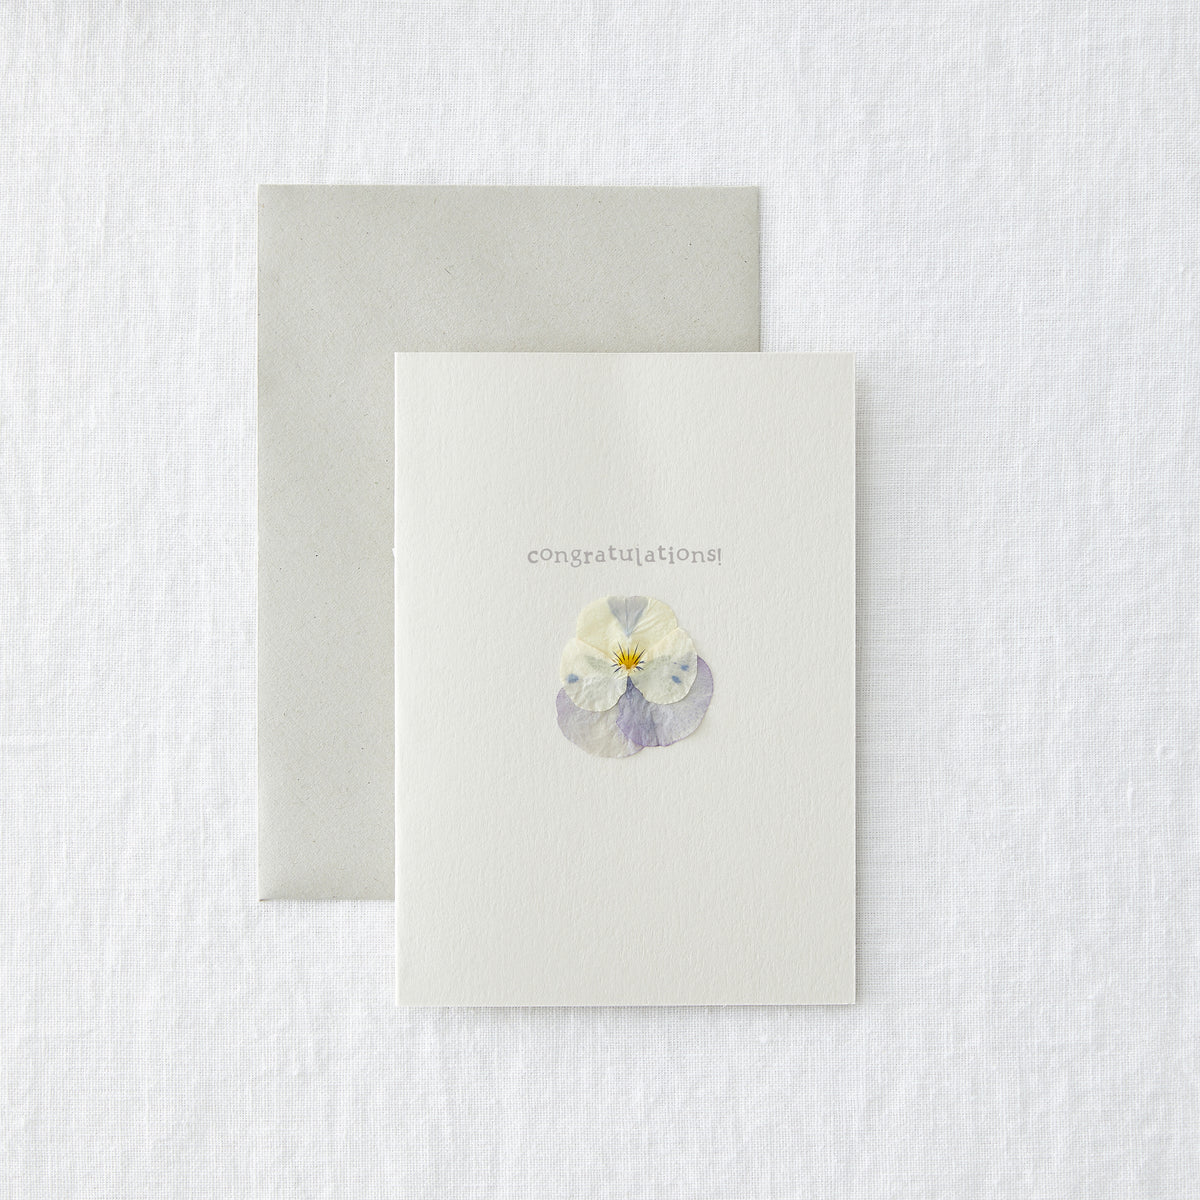 Congratulations Pressed Pansy Card by penny black